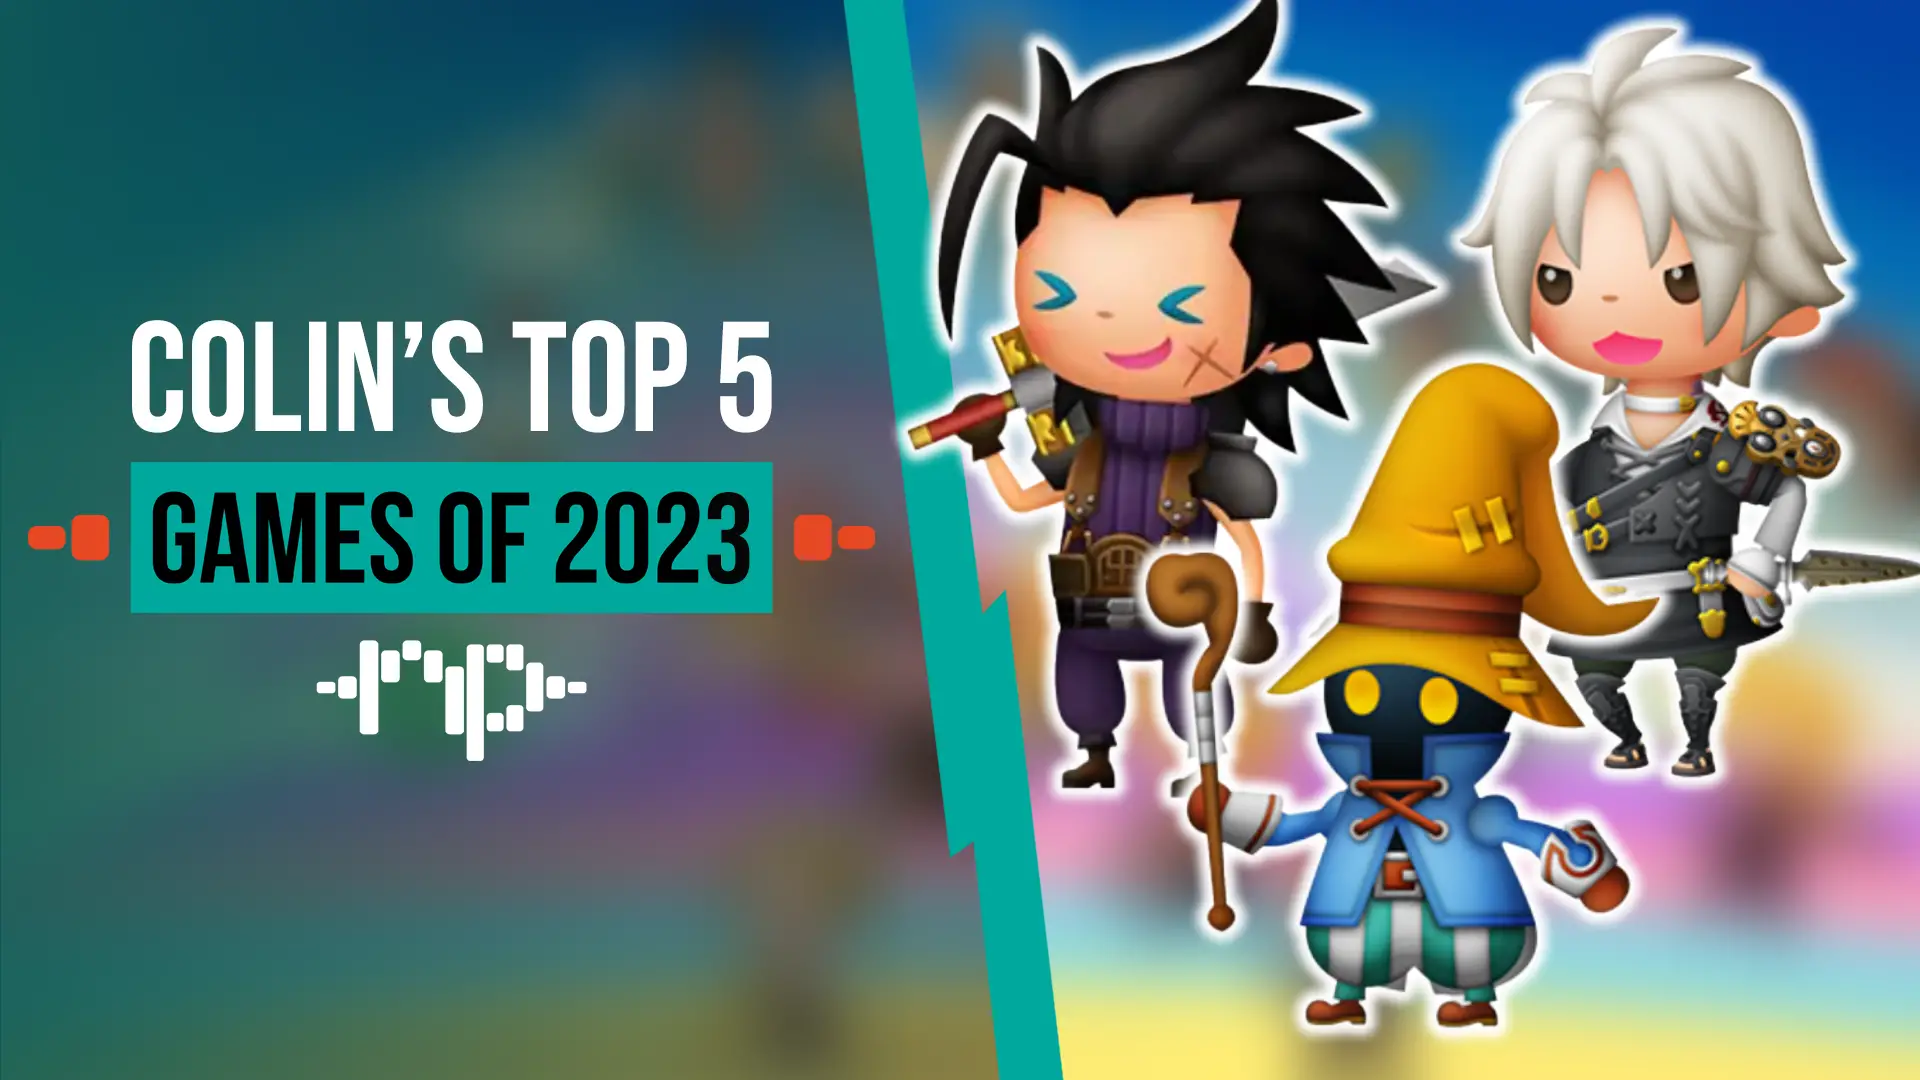 Staff Picks: Colin’s Top 5 Games 2023 – A Colorful Bouquet of Titles to Match His Style